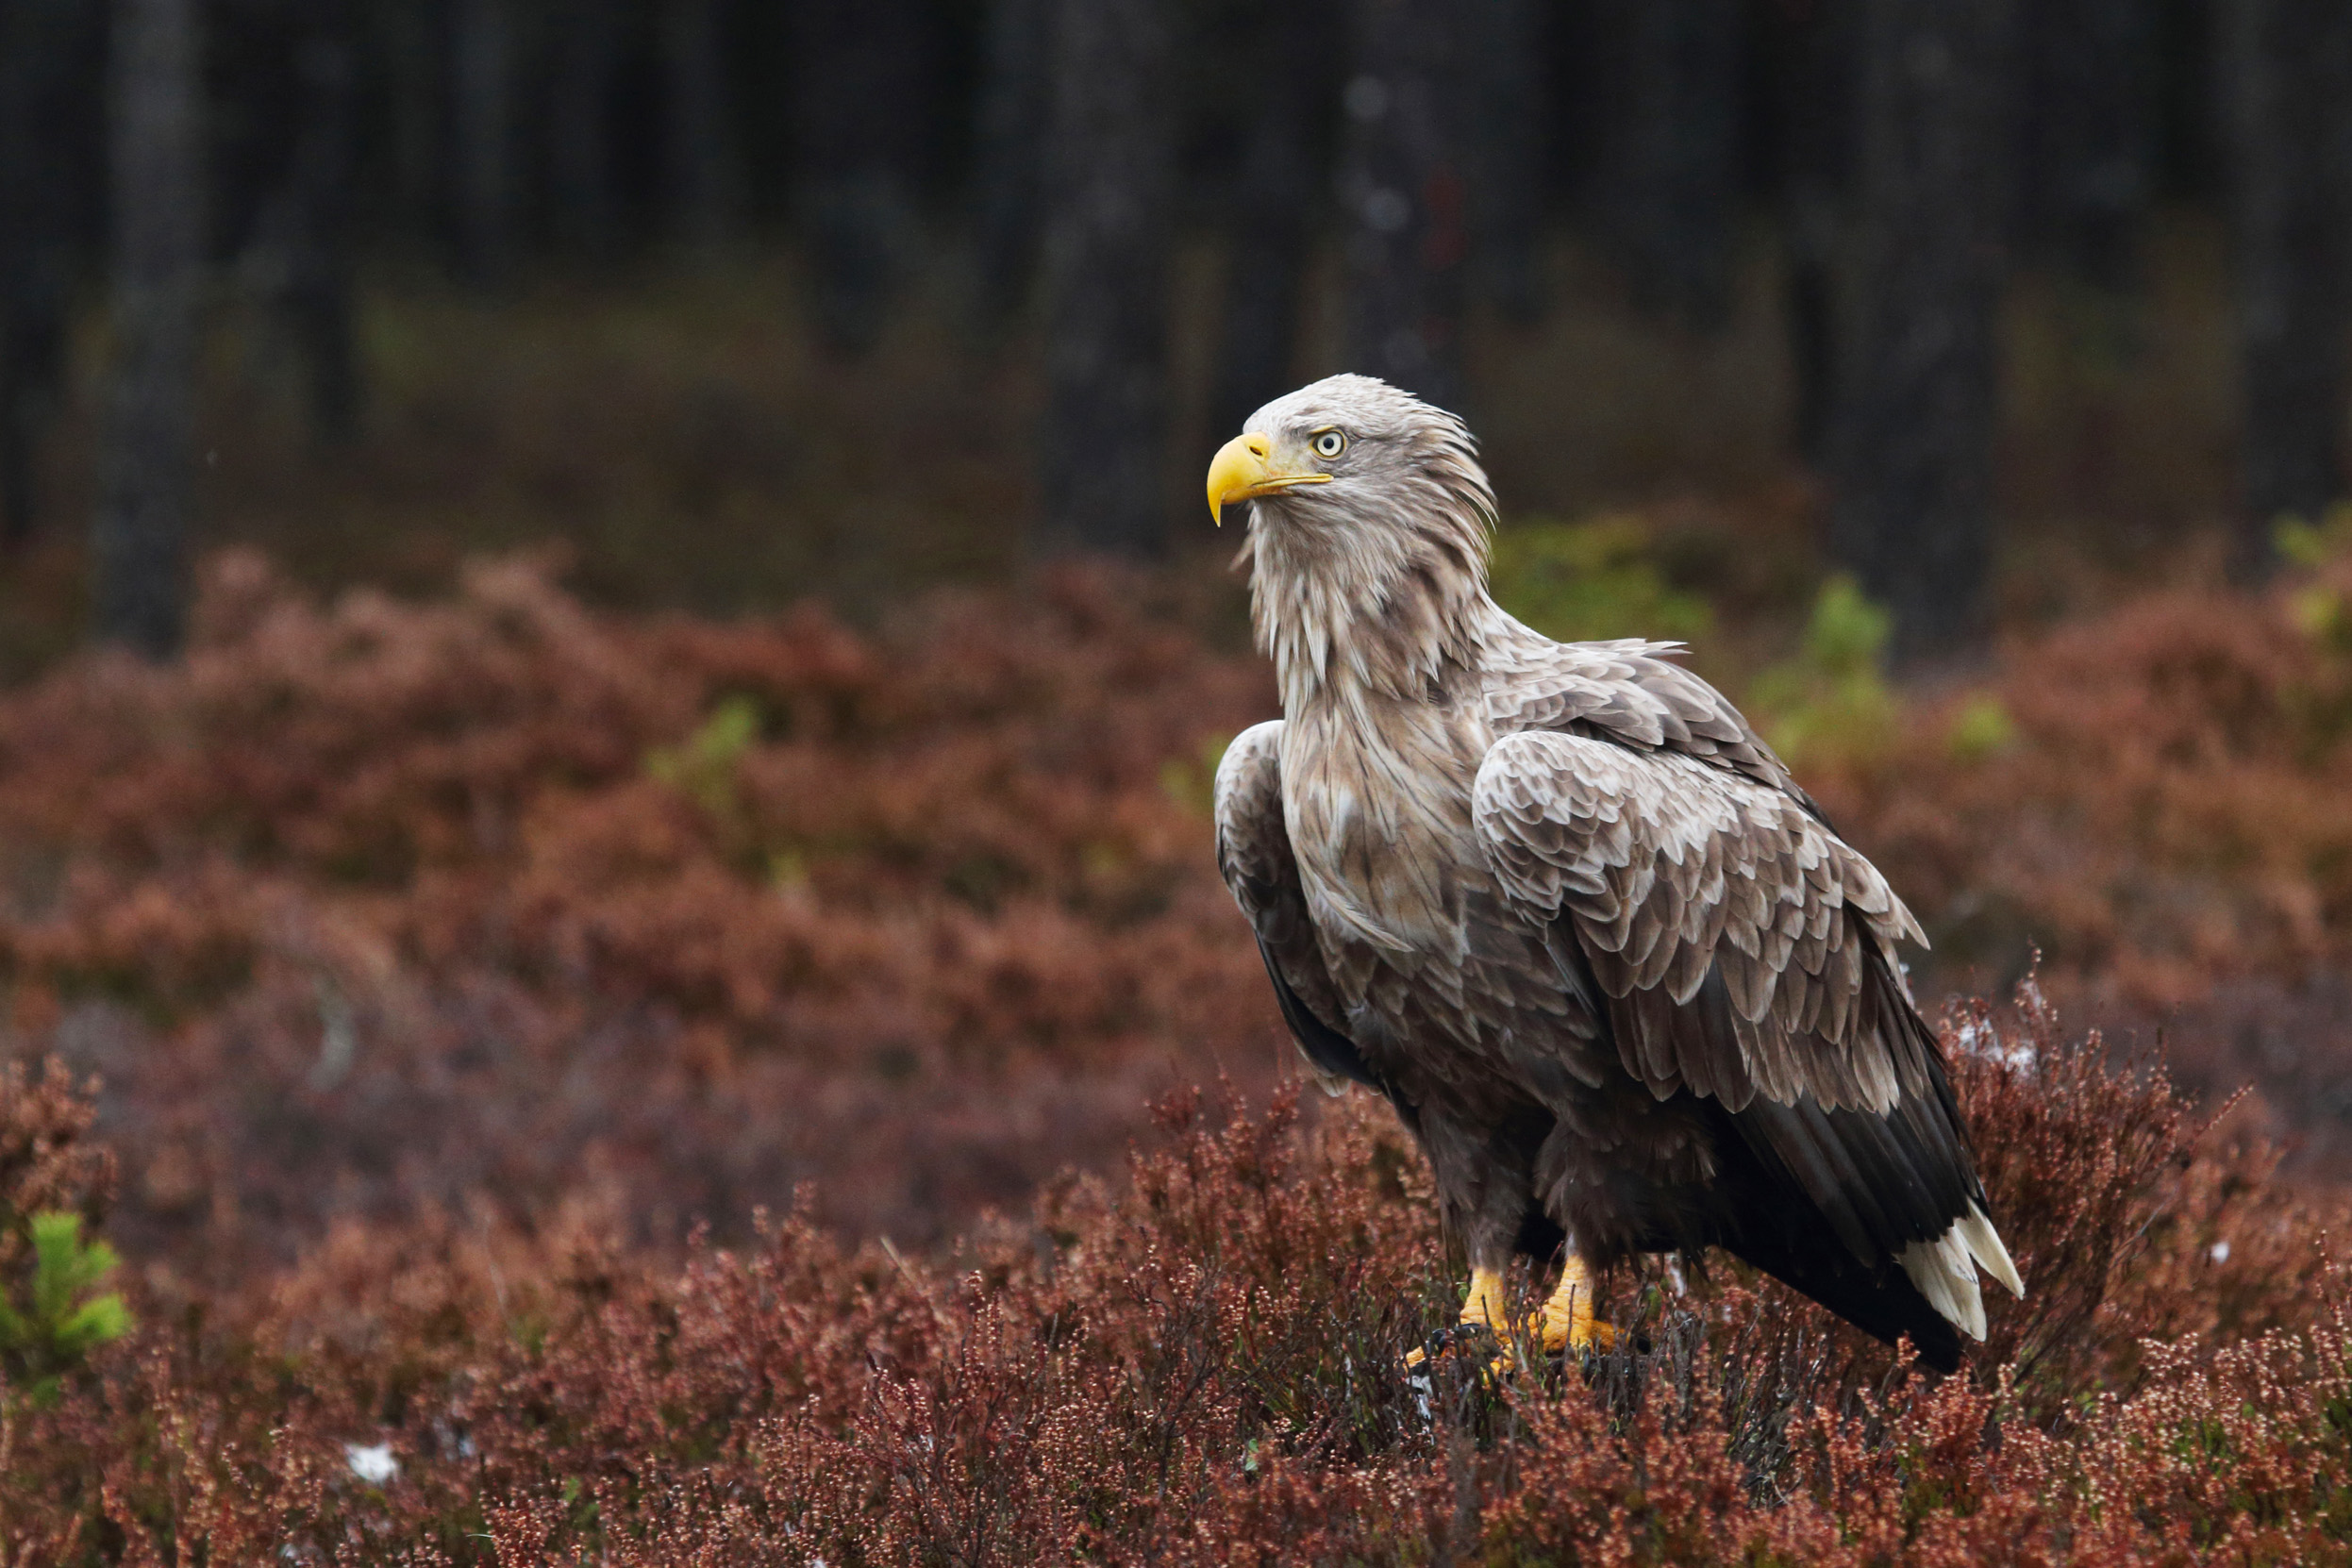 White-tailed eagle standing in a field of heather.